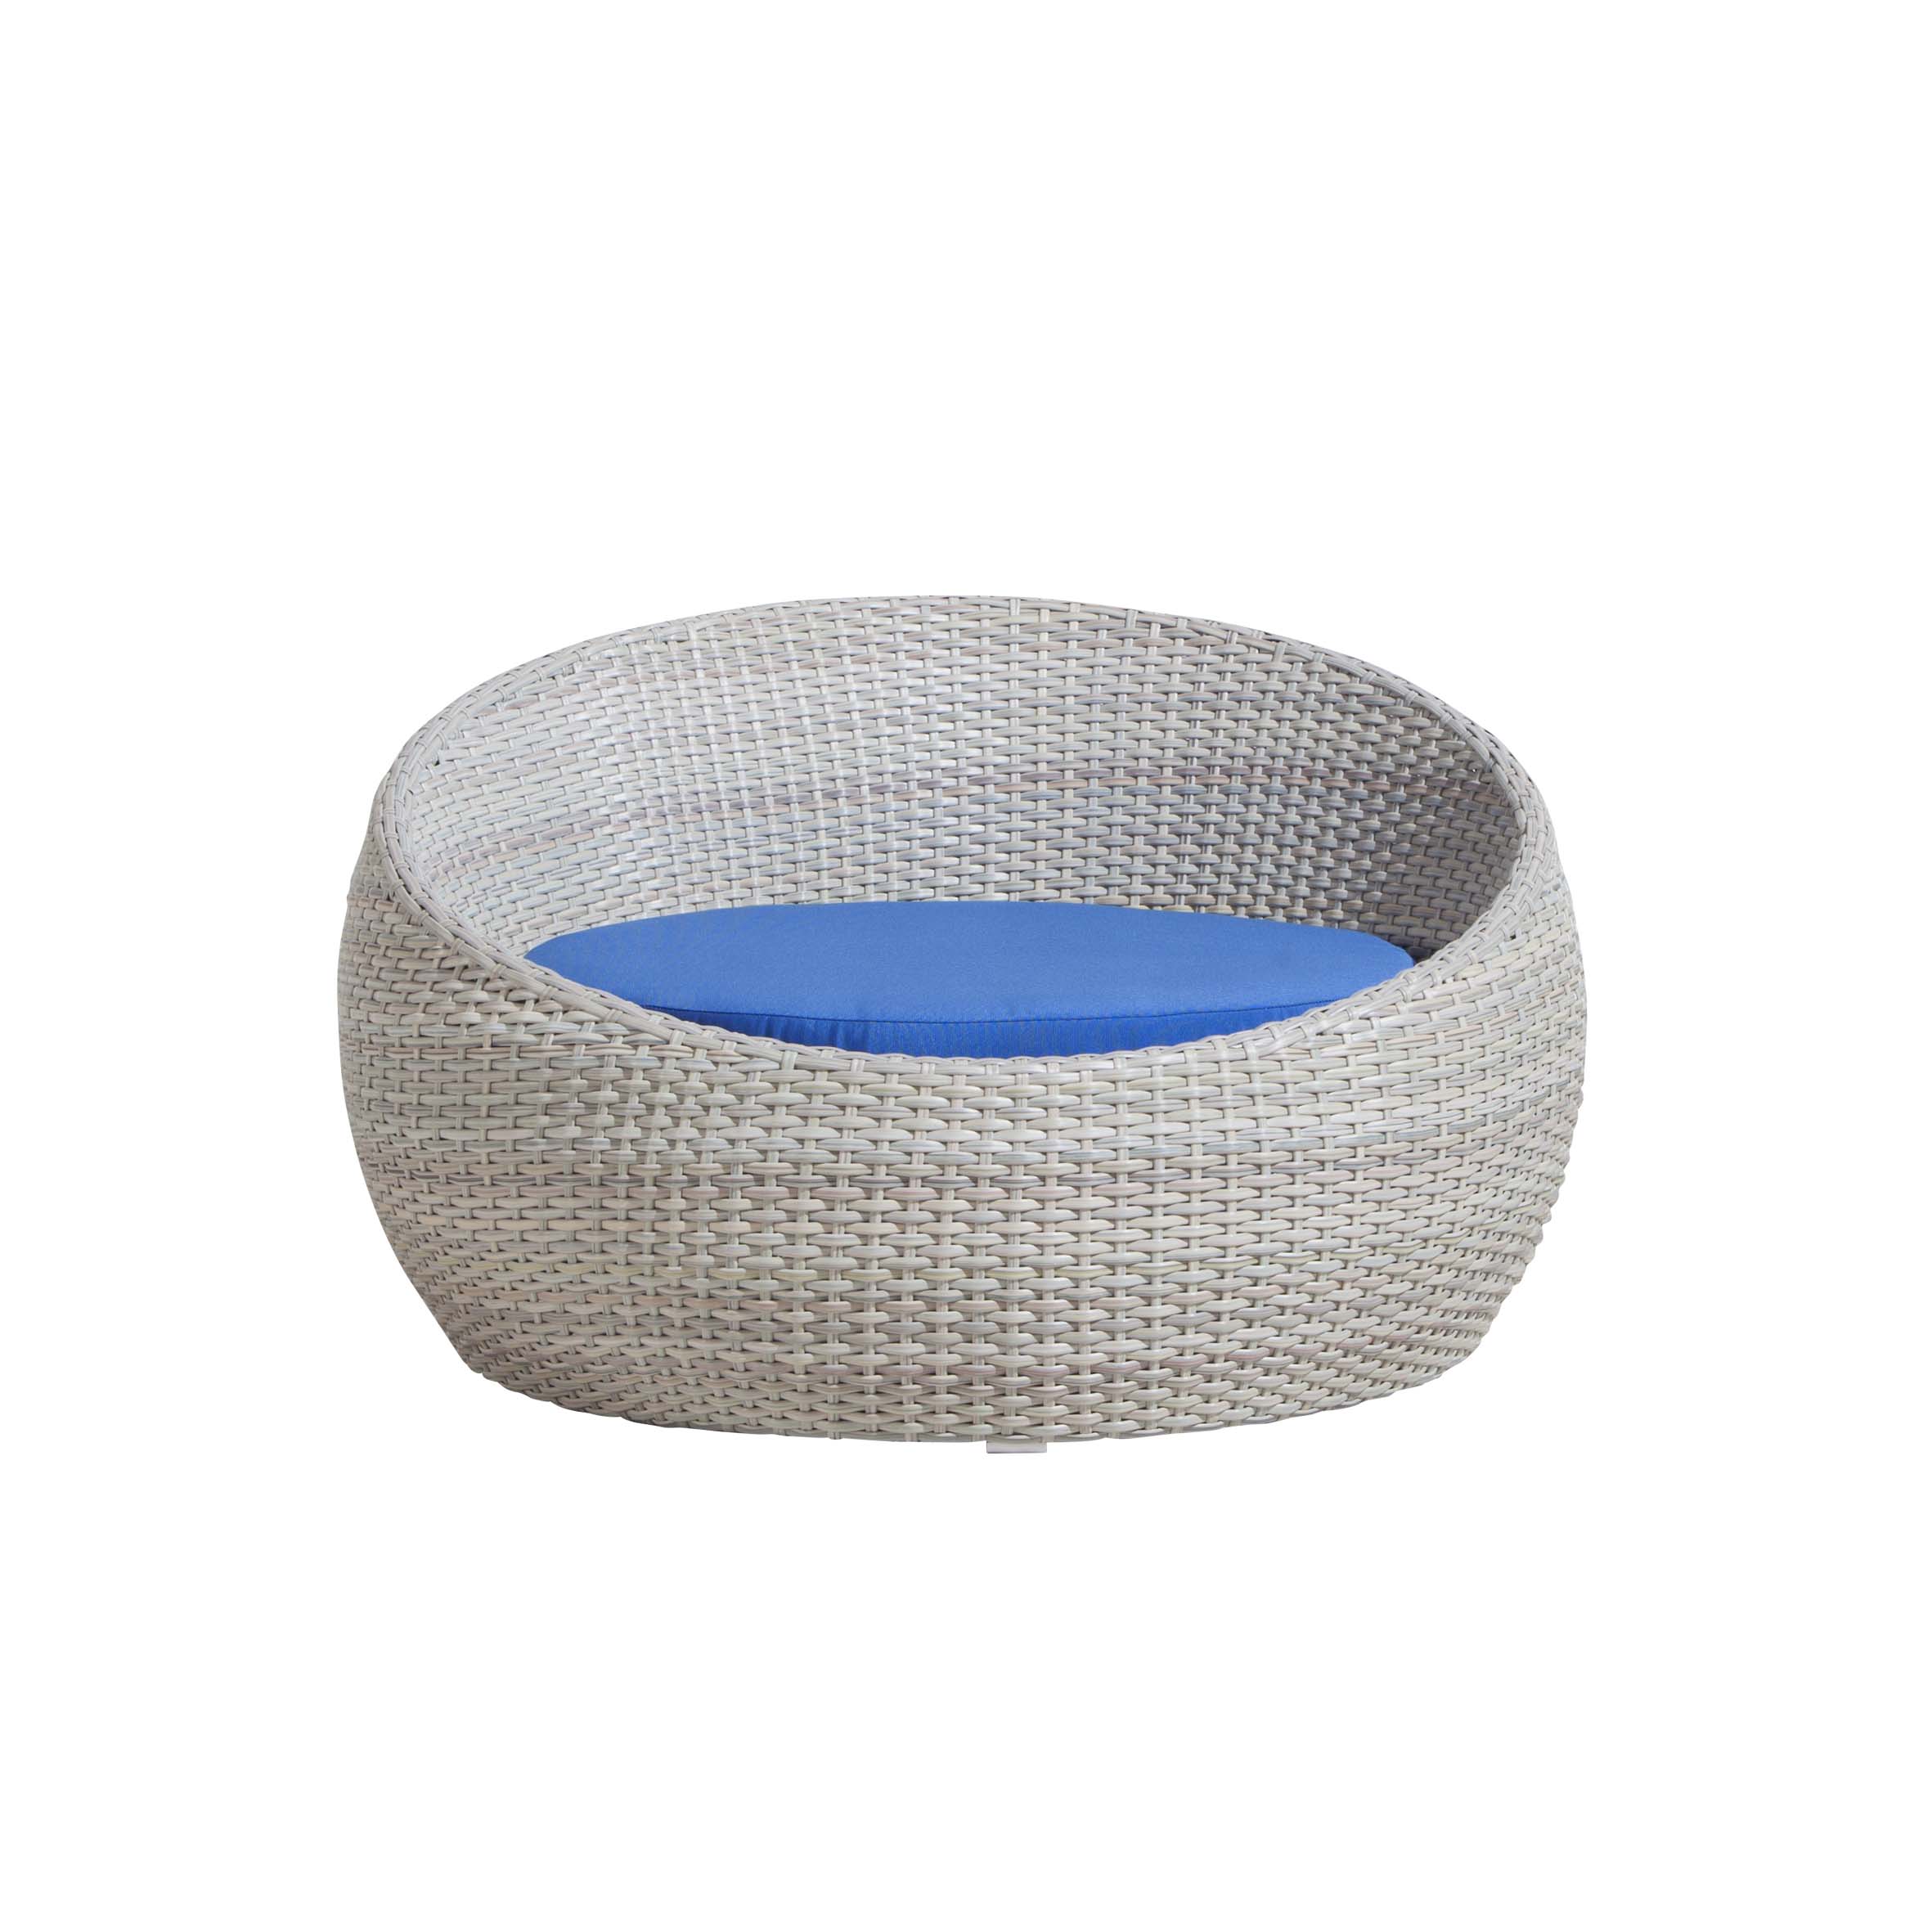 Sky rattan round daybed S5